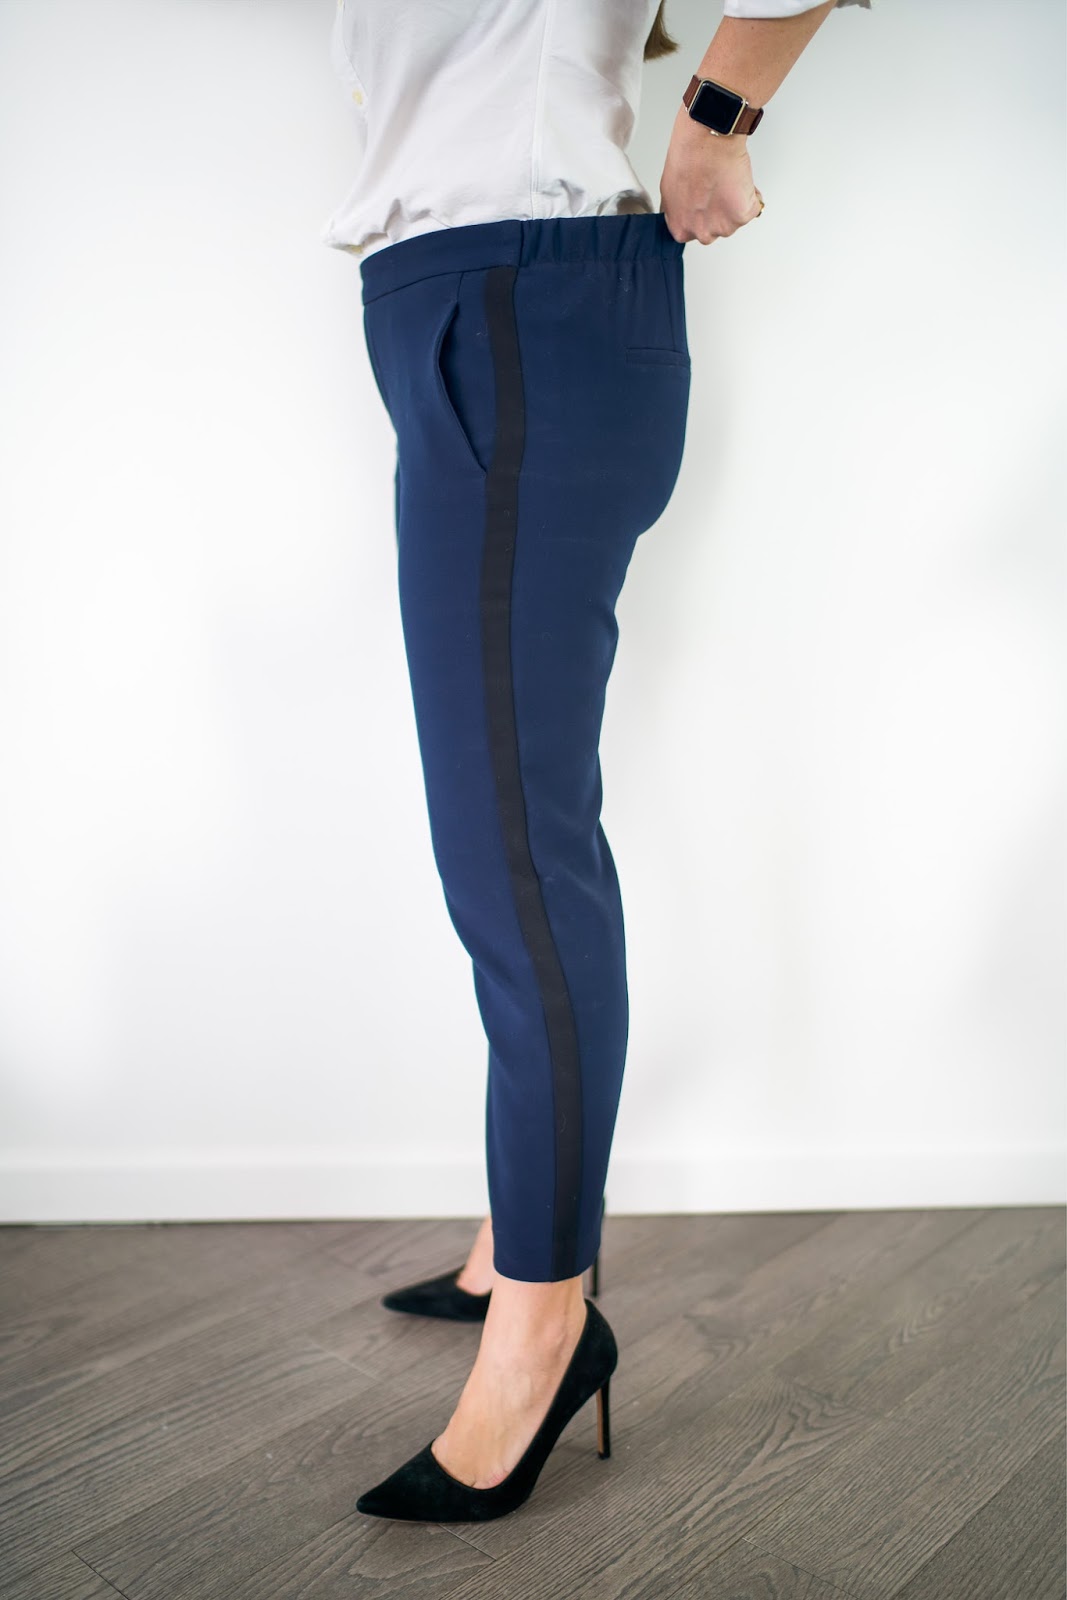 Comfy Work Pants by popular New York style blogger Covering the Bases